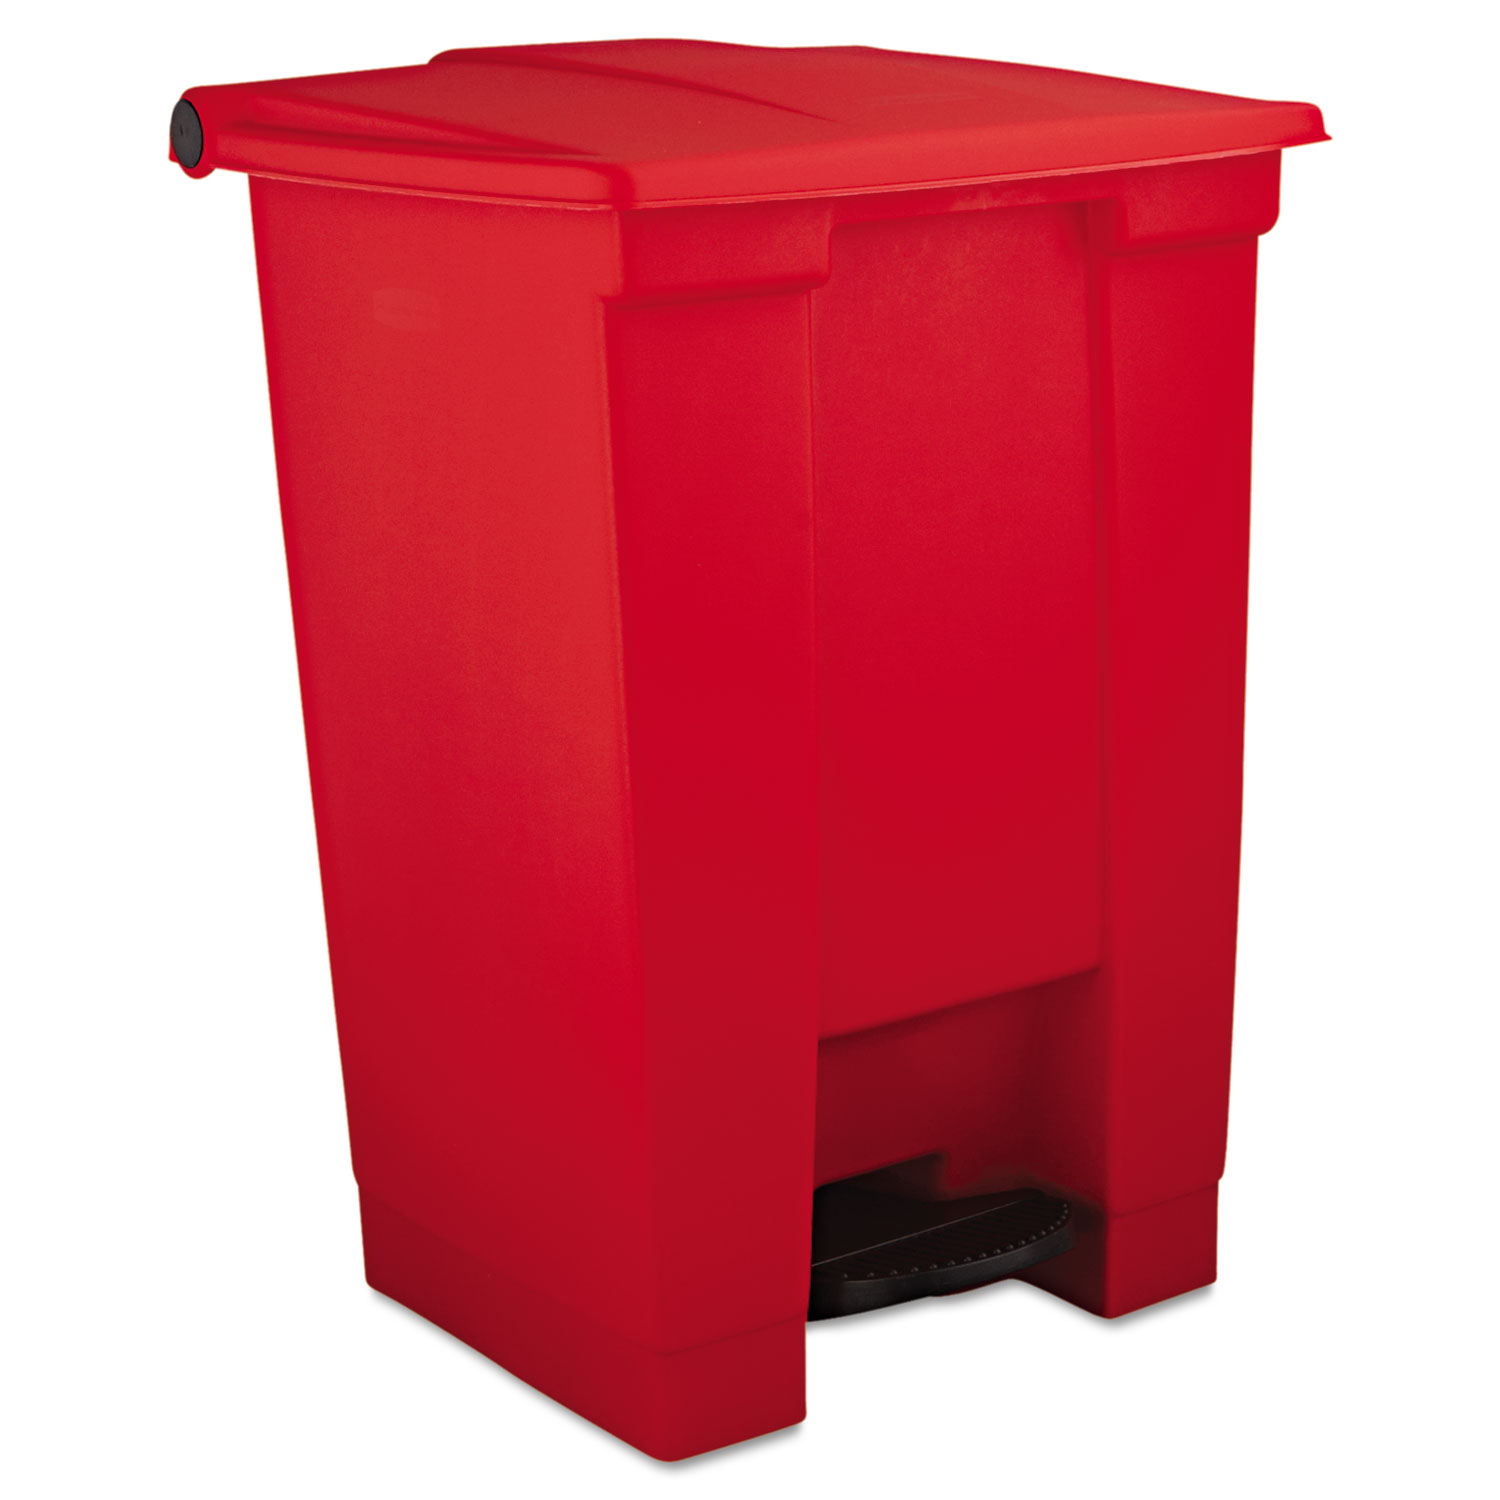  Rubbermaid Commercial 614400RED Indoor Utility Step-On Waste Container, Square, Plastic, 12 gal, Red (RCP6144RED) 